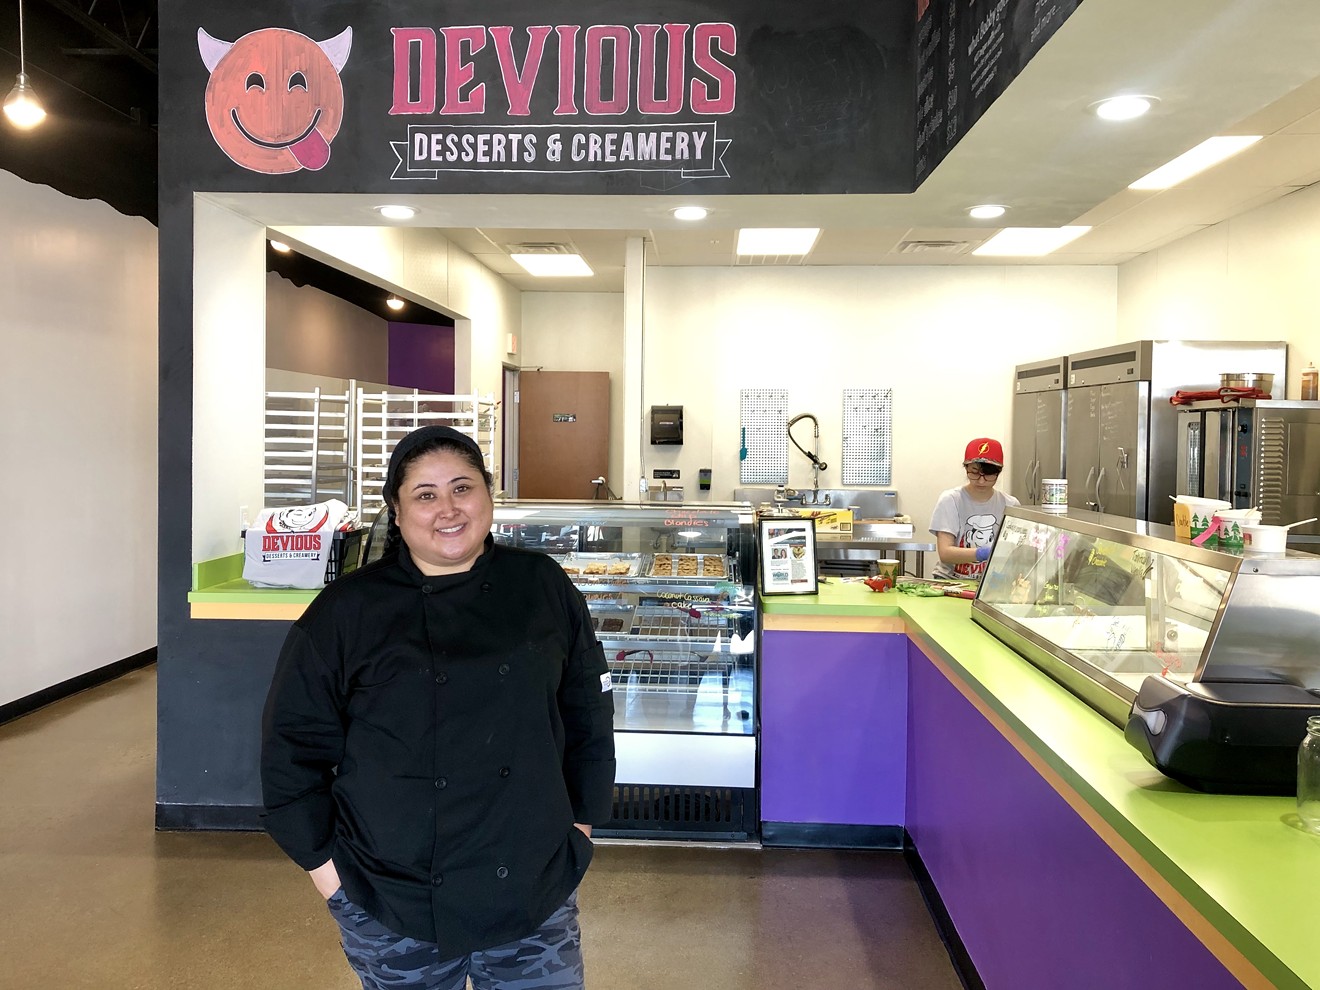 Meriel Bautista, chef and owner of Devious Desserts and Creamery, is bringing new flavors in dessert to Carrollton.